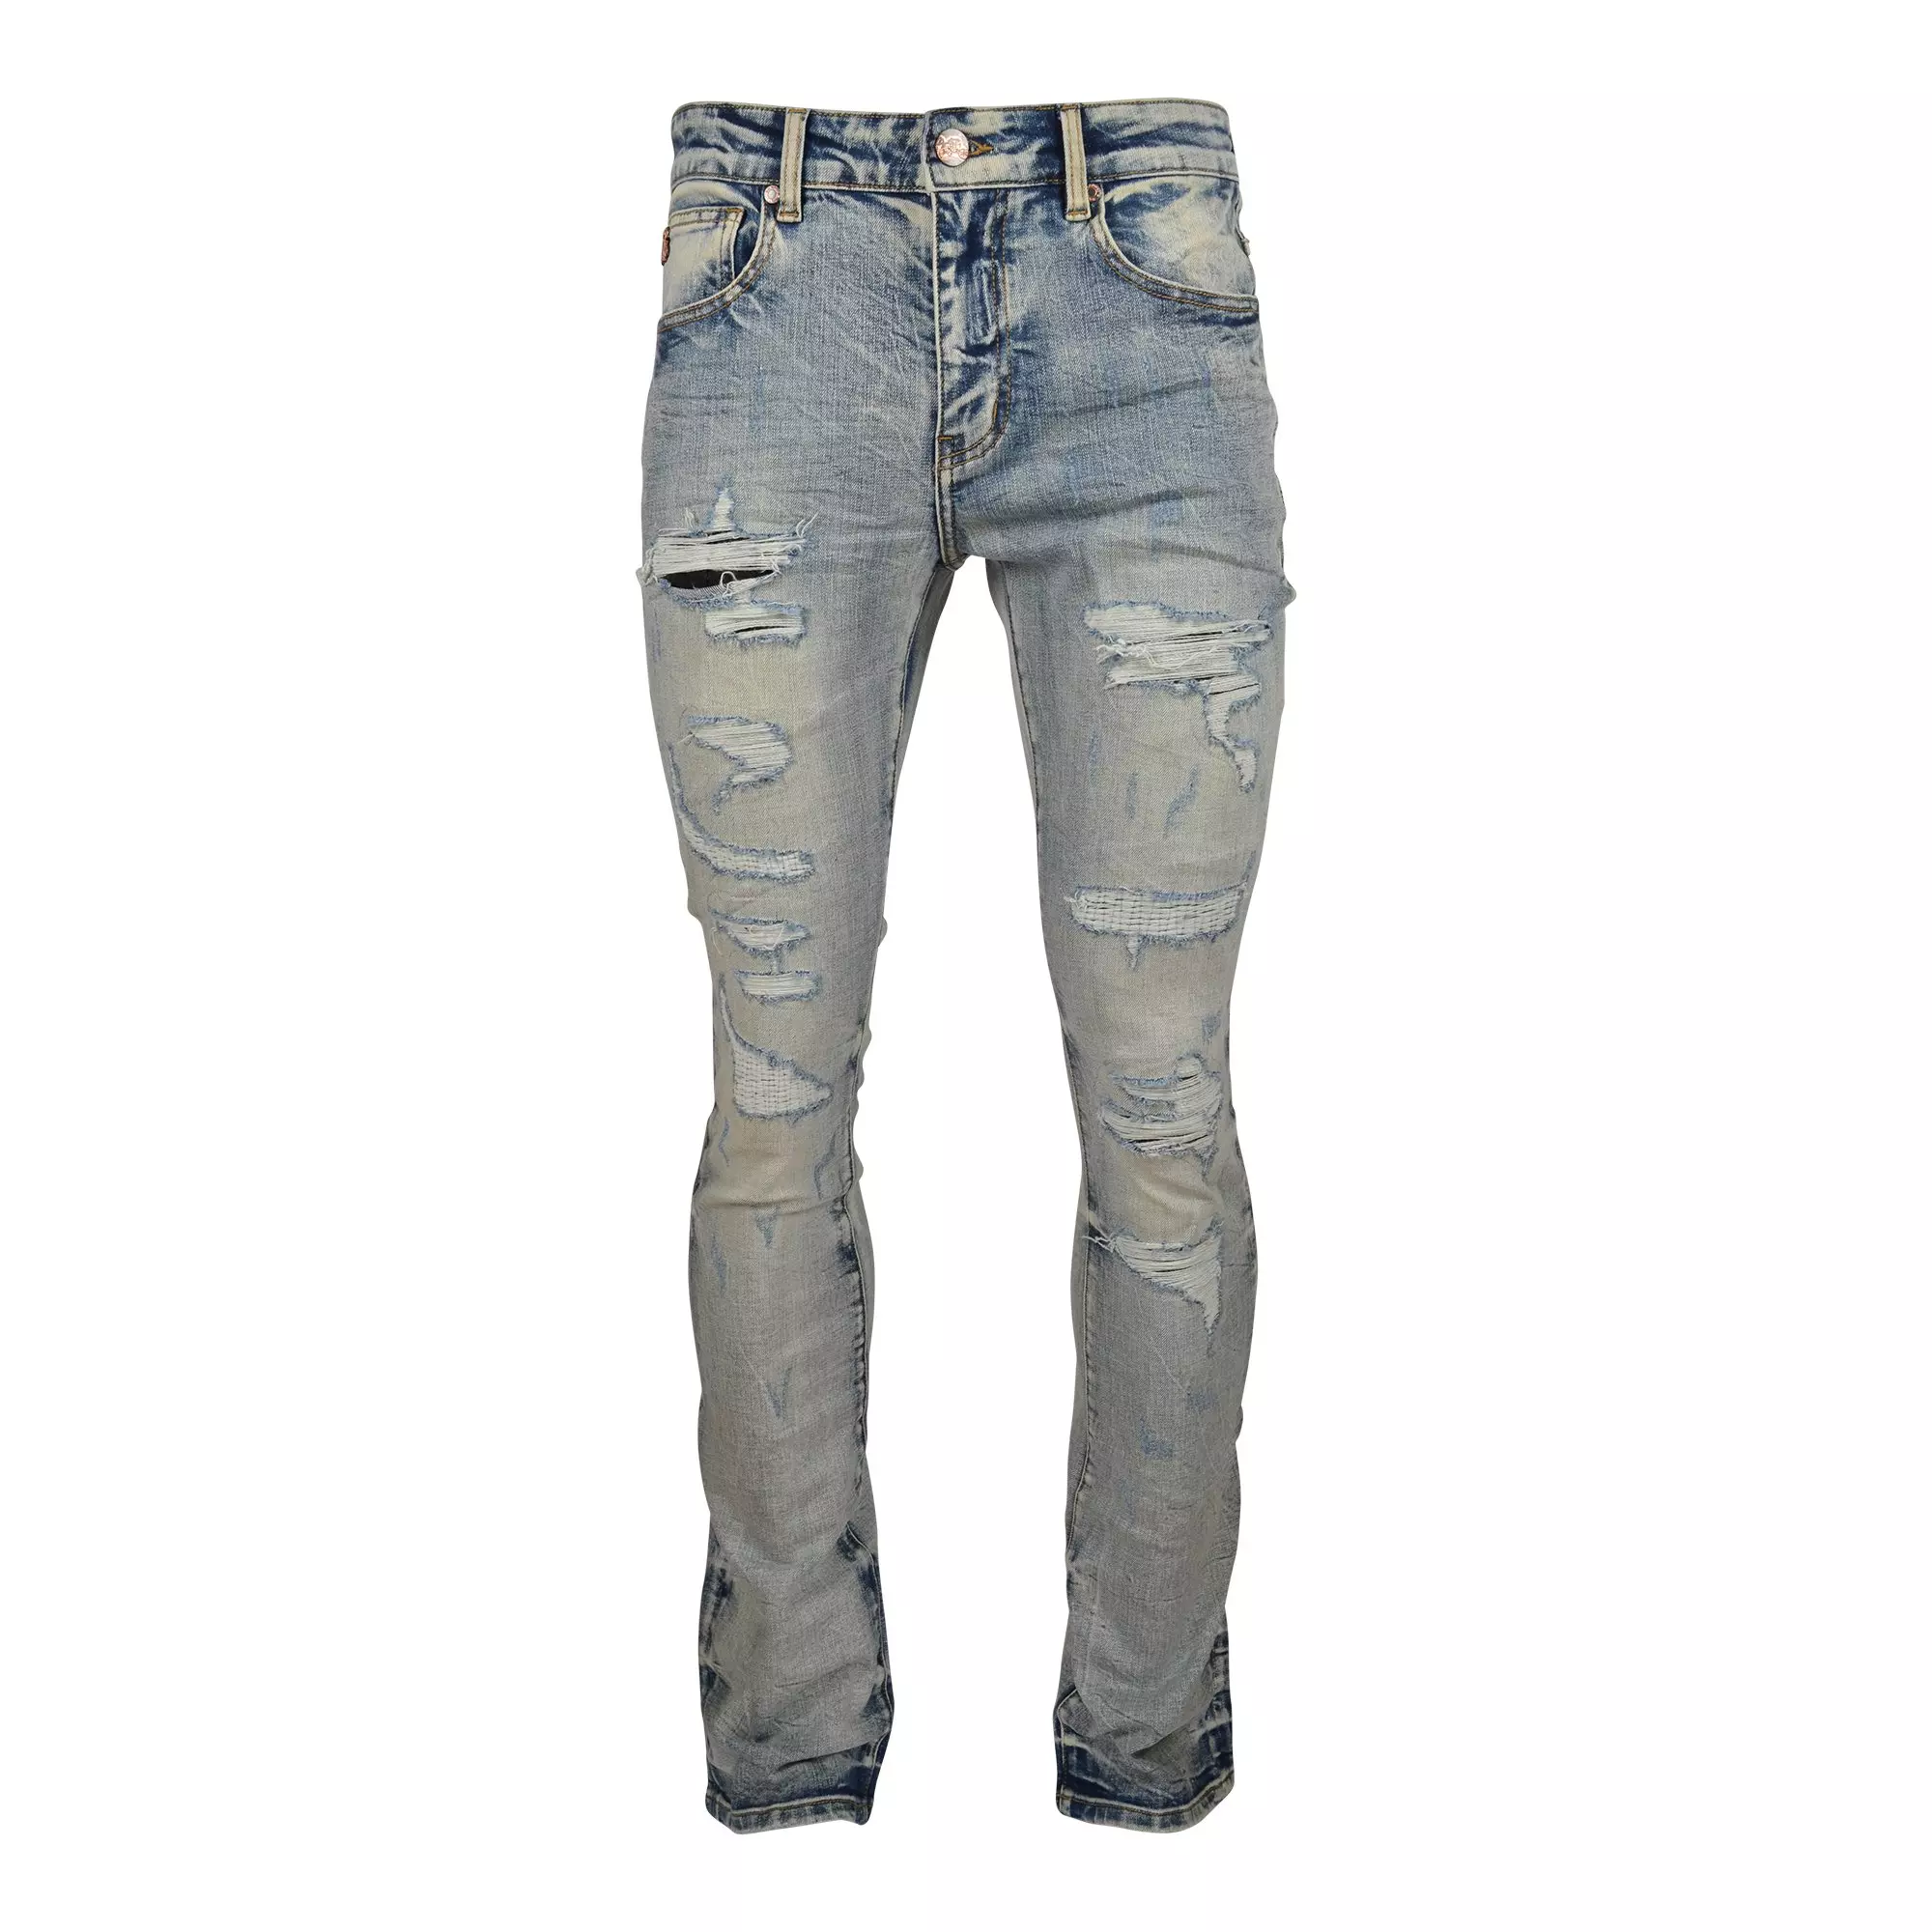 Men's Stacked Fit Distressed Denim Jeans